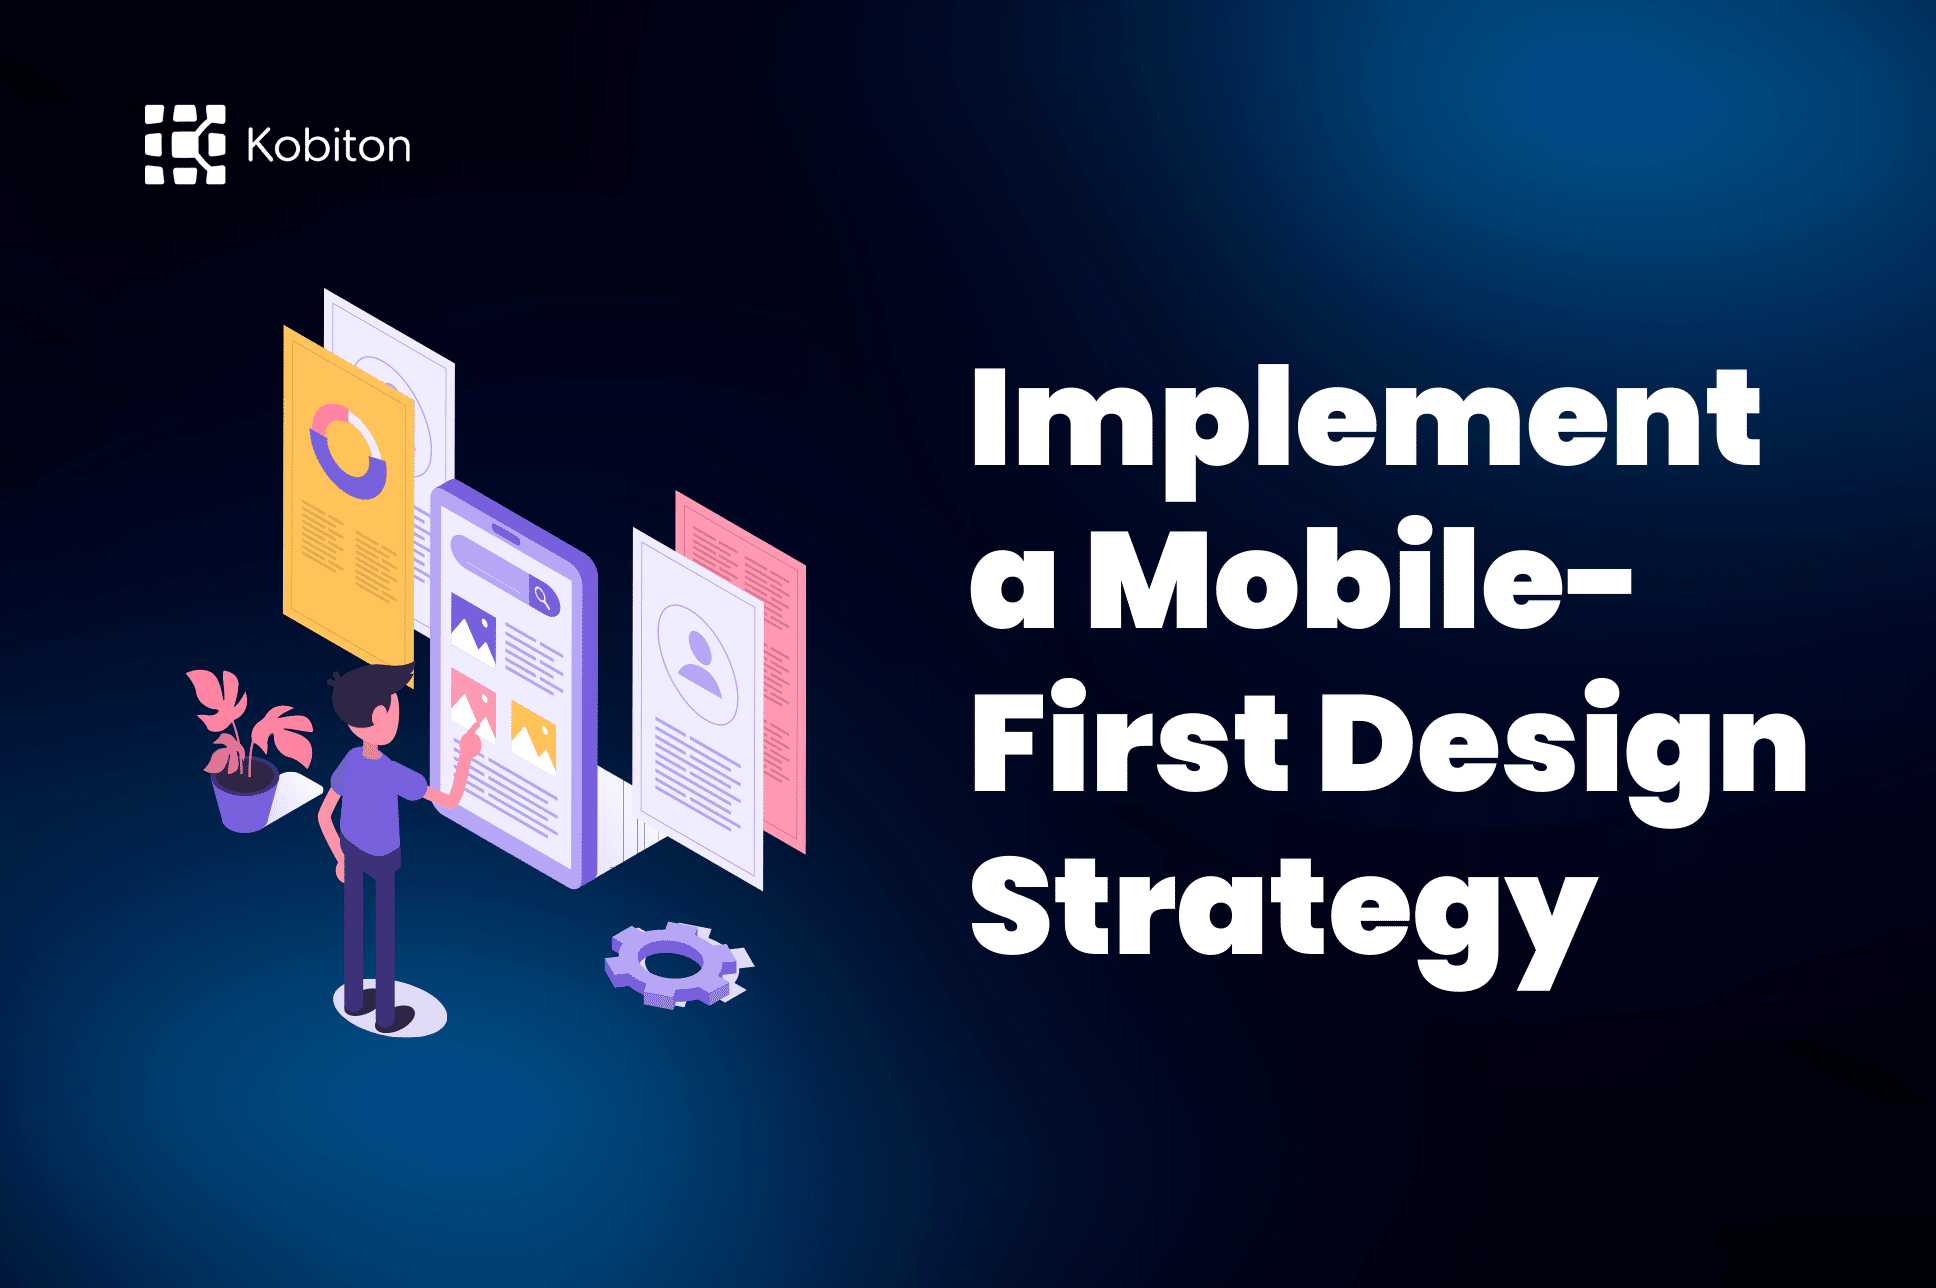 Implement a Mobile-First Design Strategy